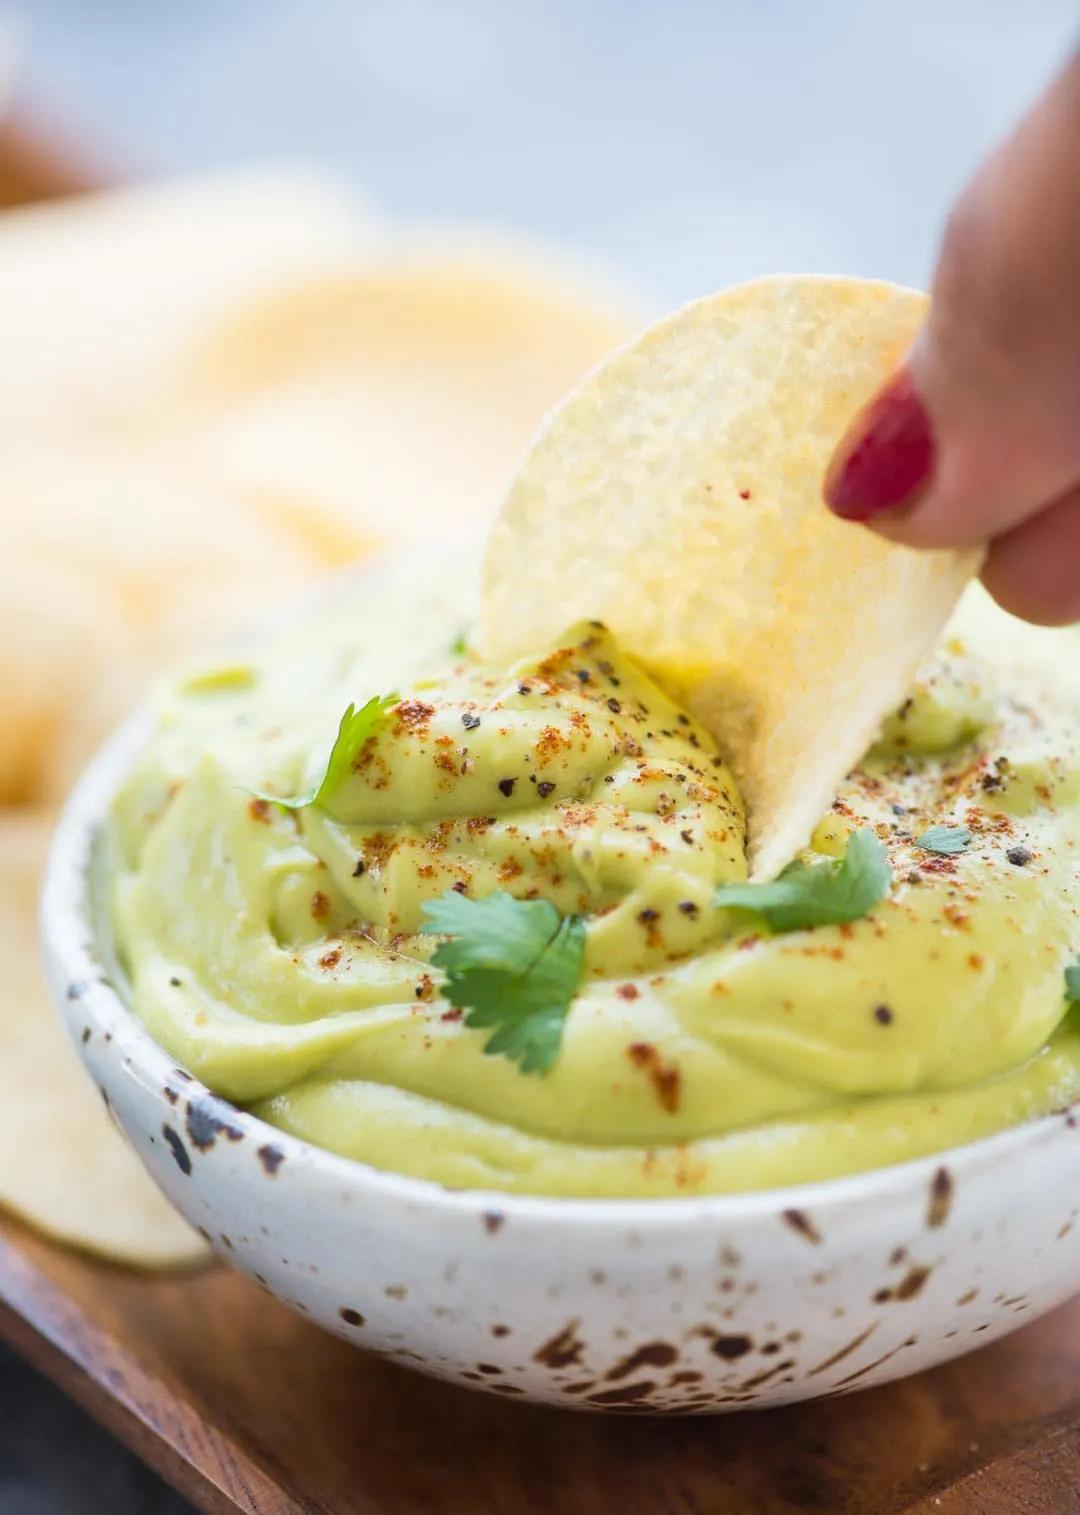 Creamy Avocado Dip - The flavours of kitchen